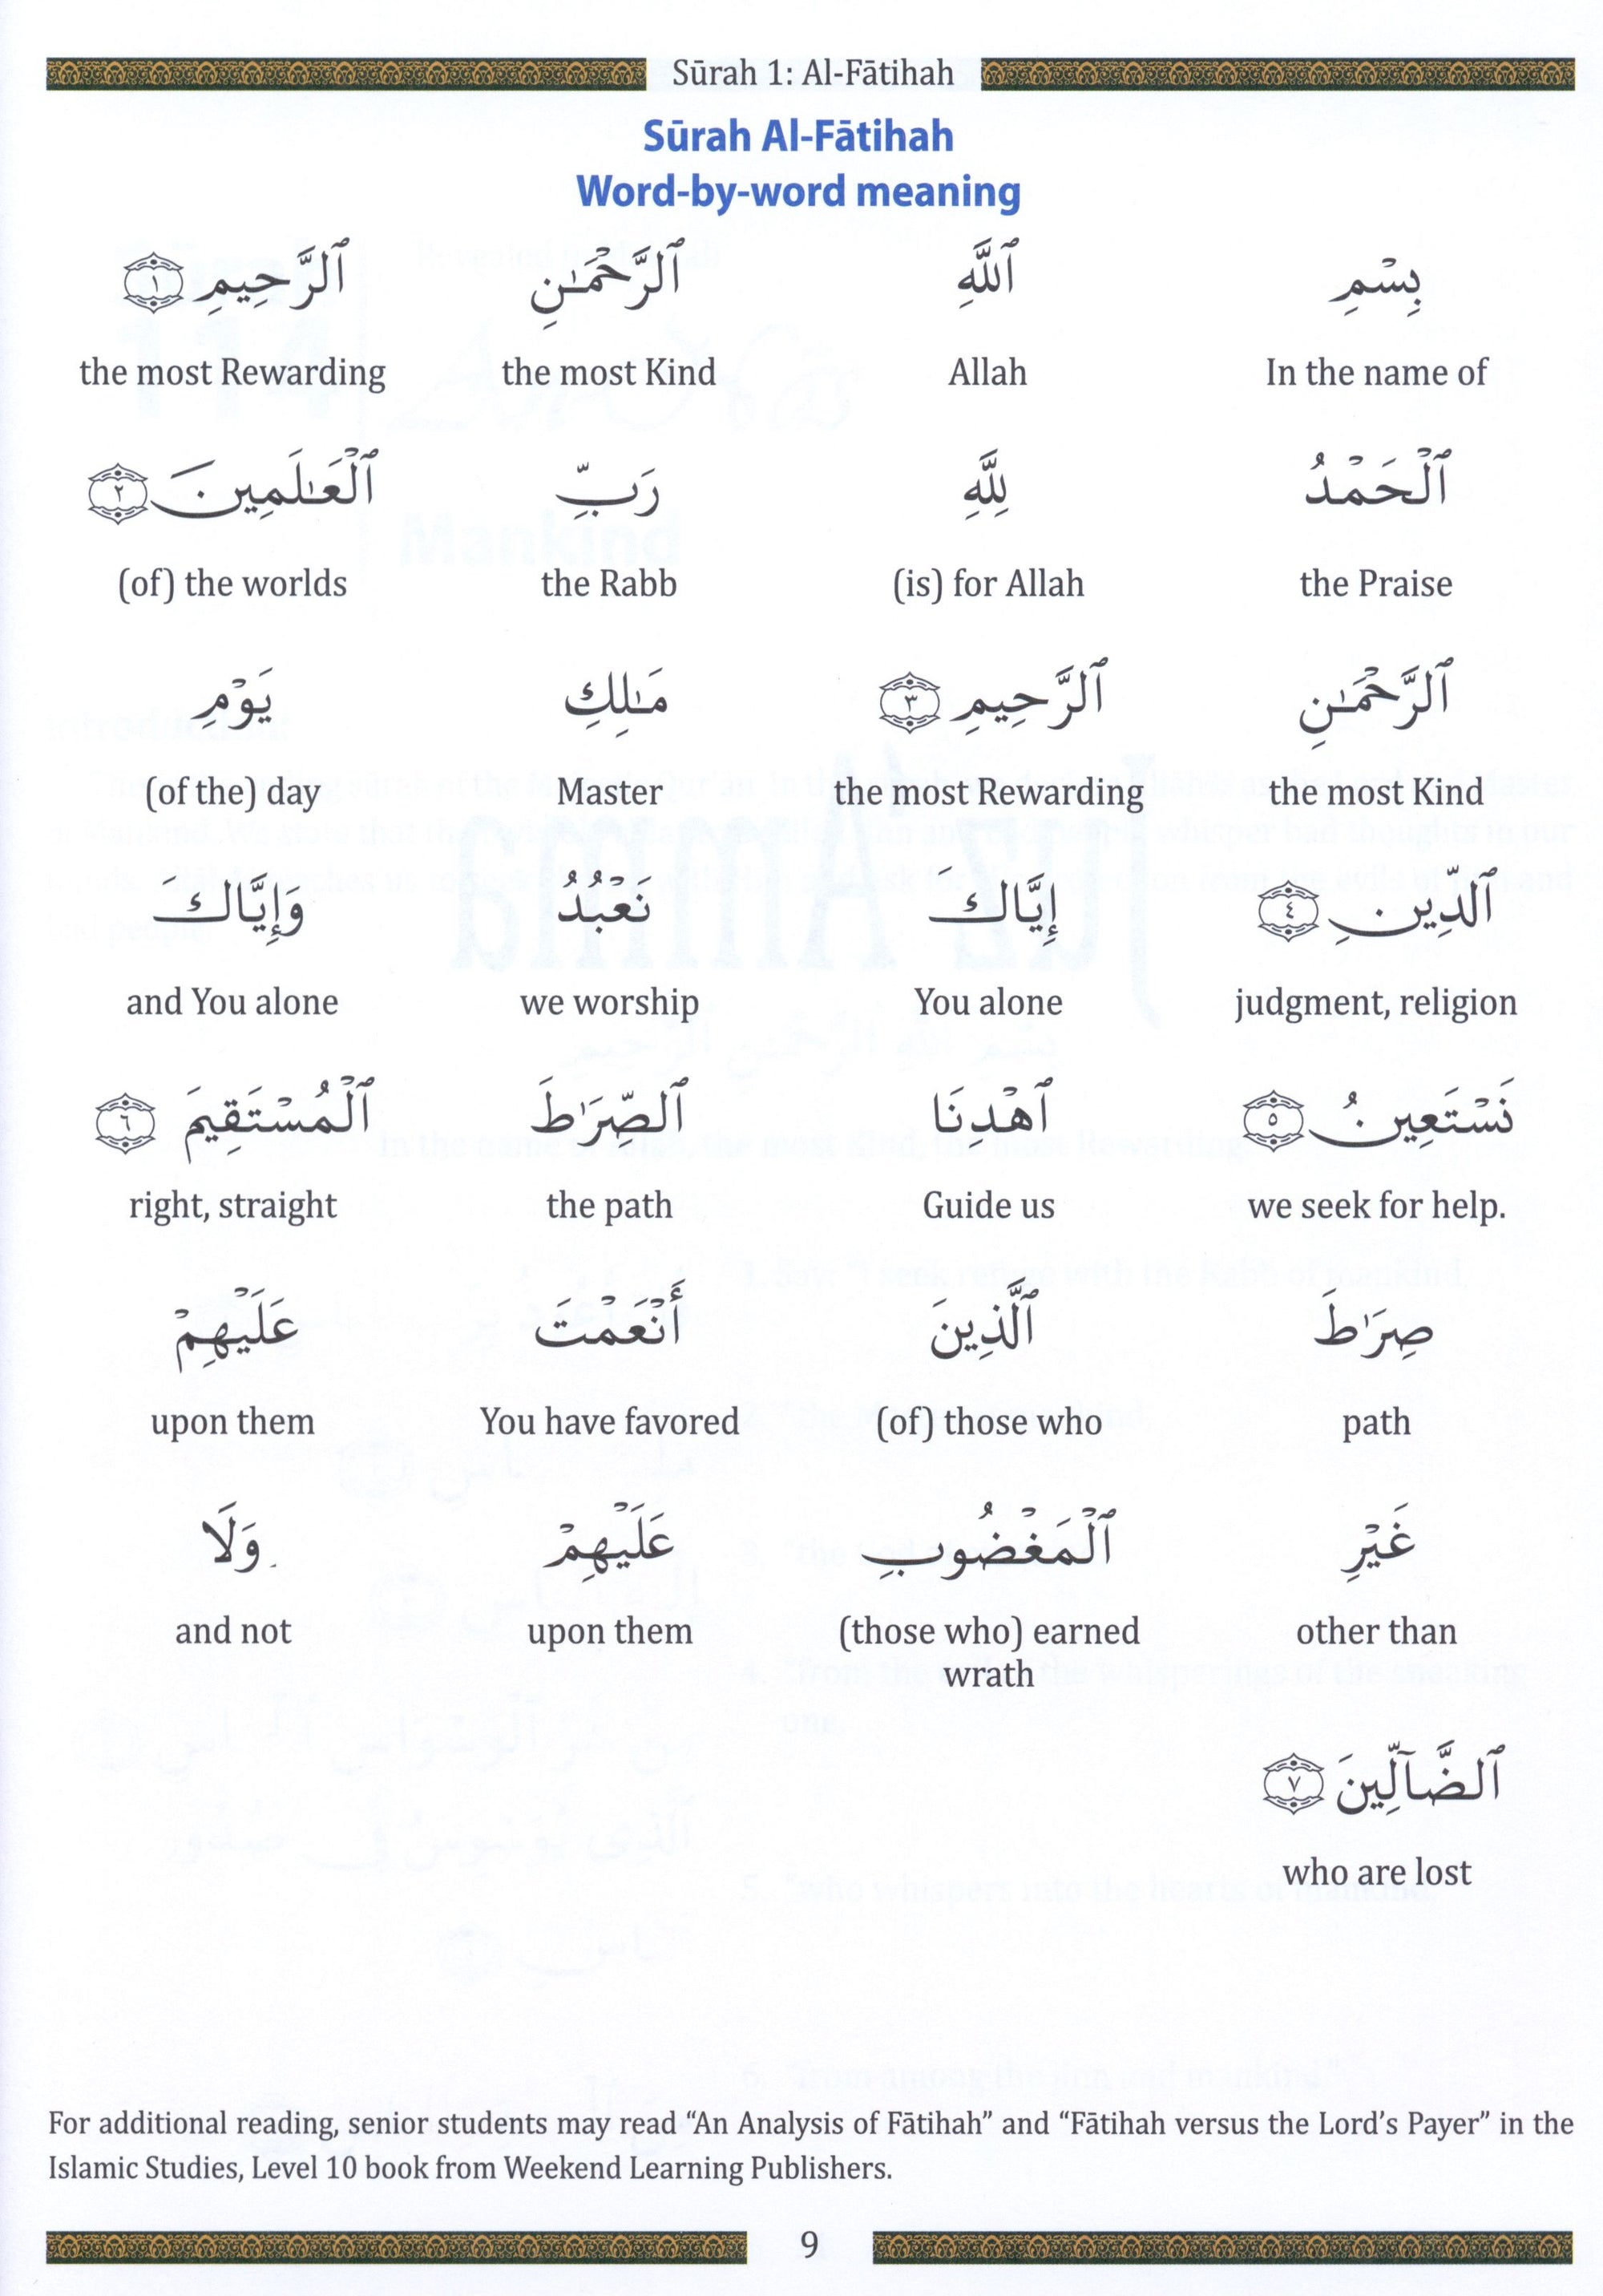 Weekend Learning Juz' Amma (Part 30) for School Students without Transliteration (Red)